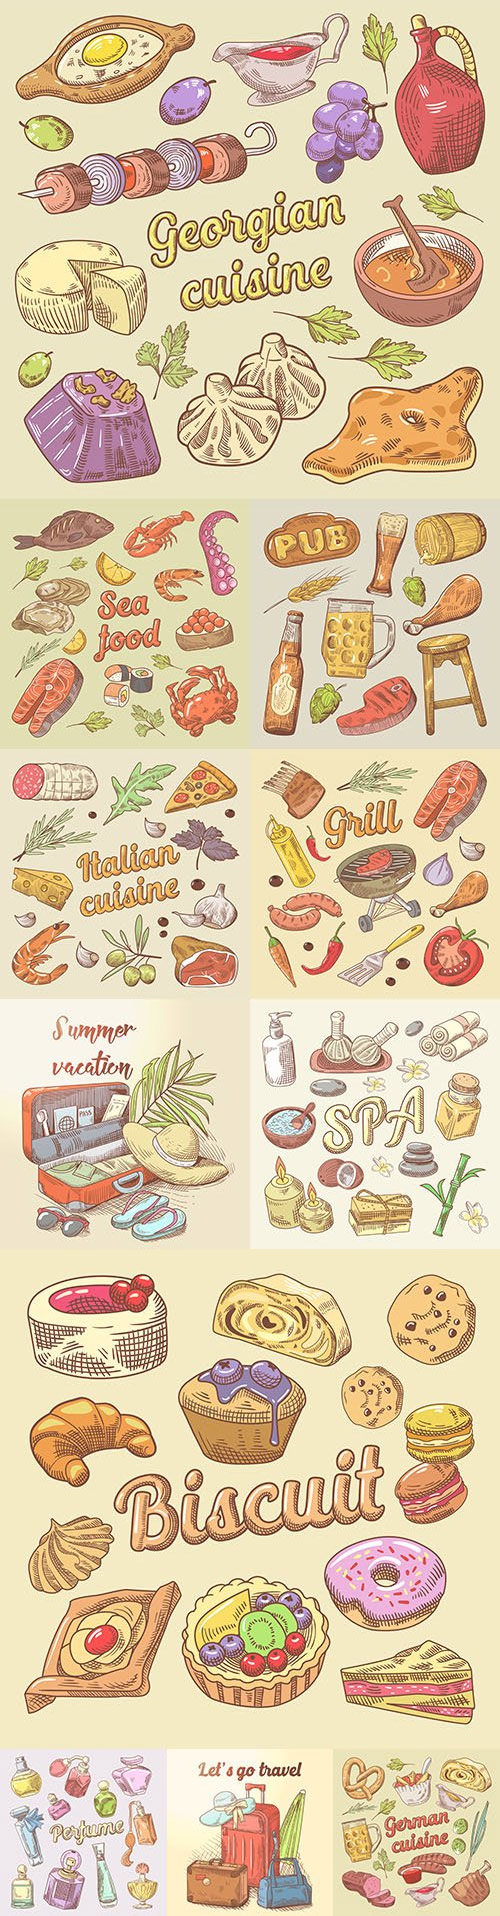 Doodle traditional dishes from different countries and cosmetics items